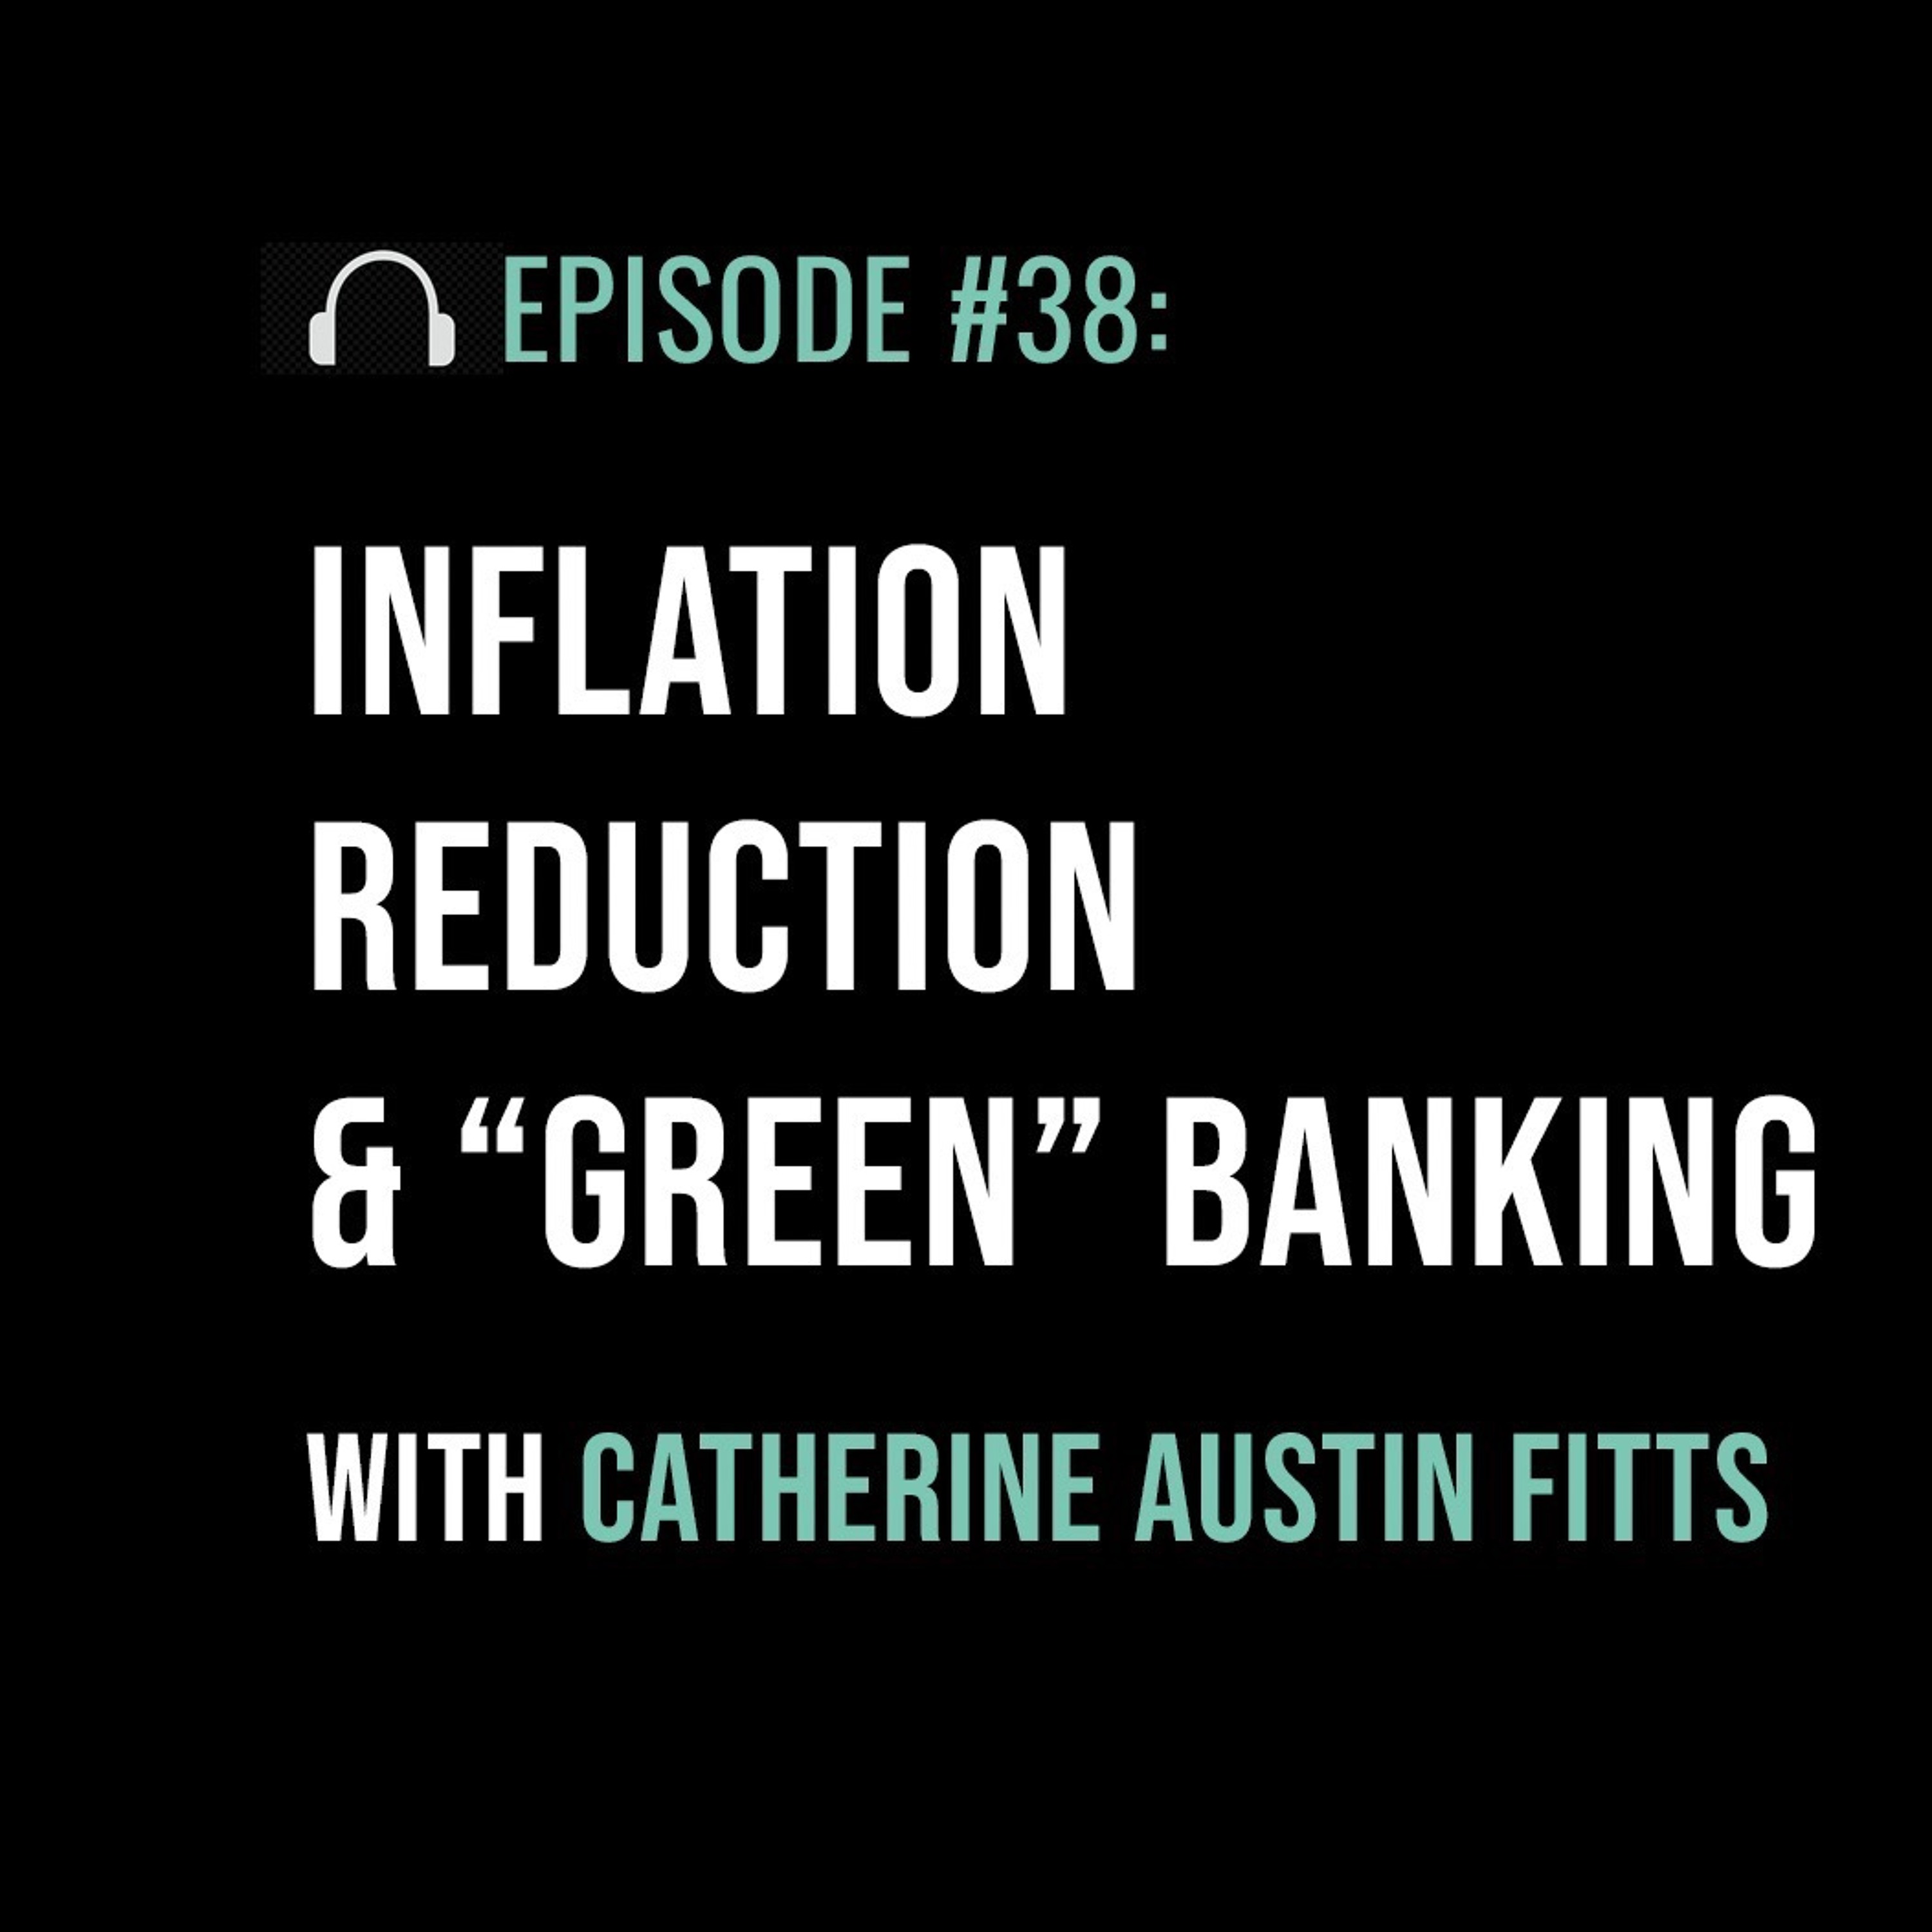 Inflation Reduction & “Green” Banking with Catherine Austin Fitts